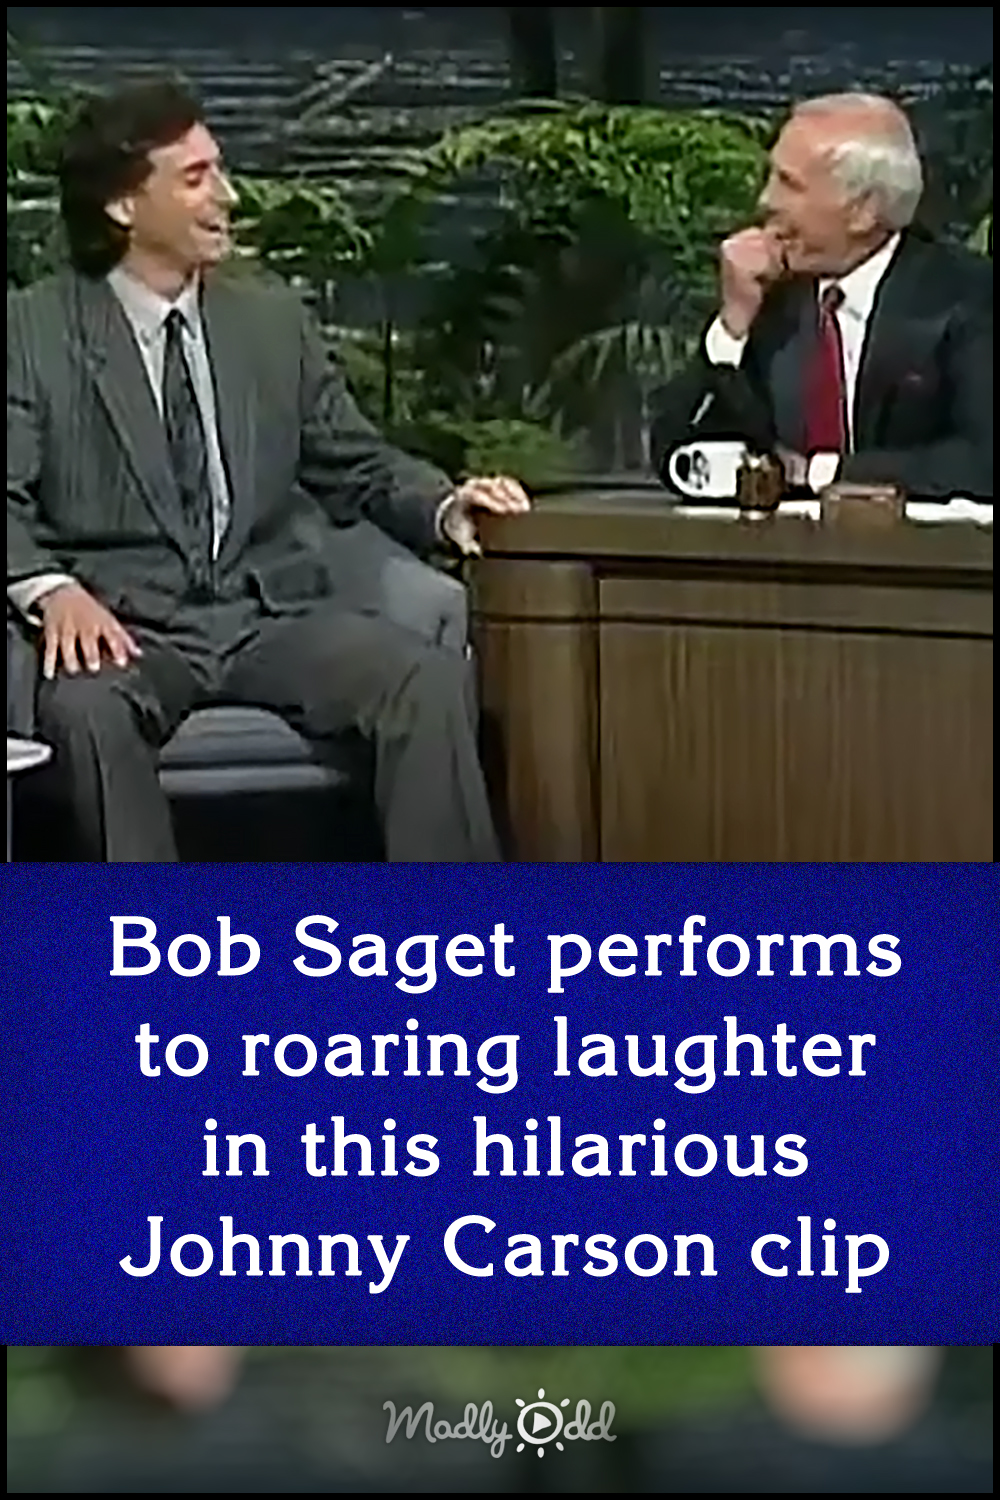 Bob Saget performs to roaring laughter in this hilarious Johnny Carson clip